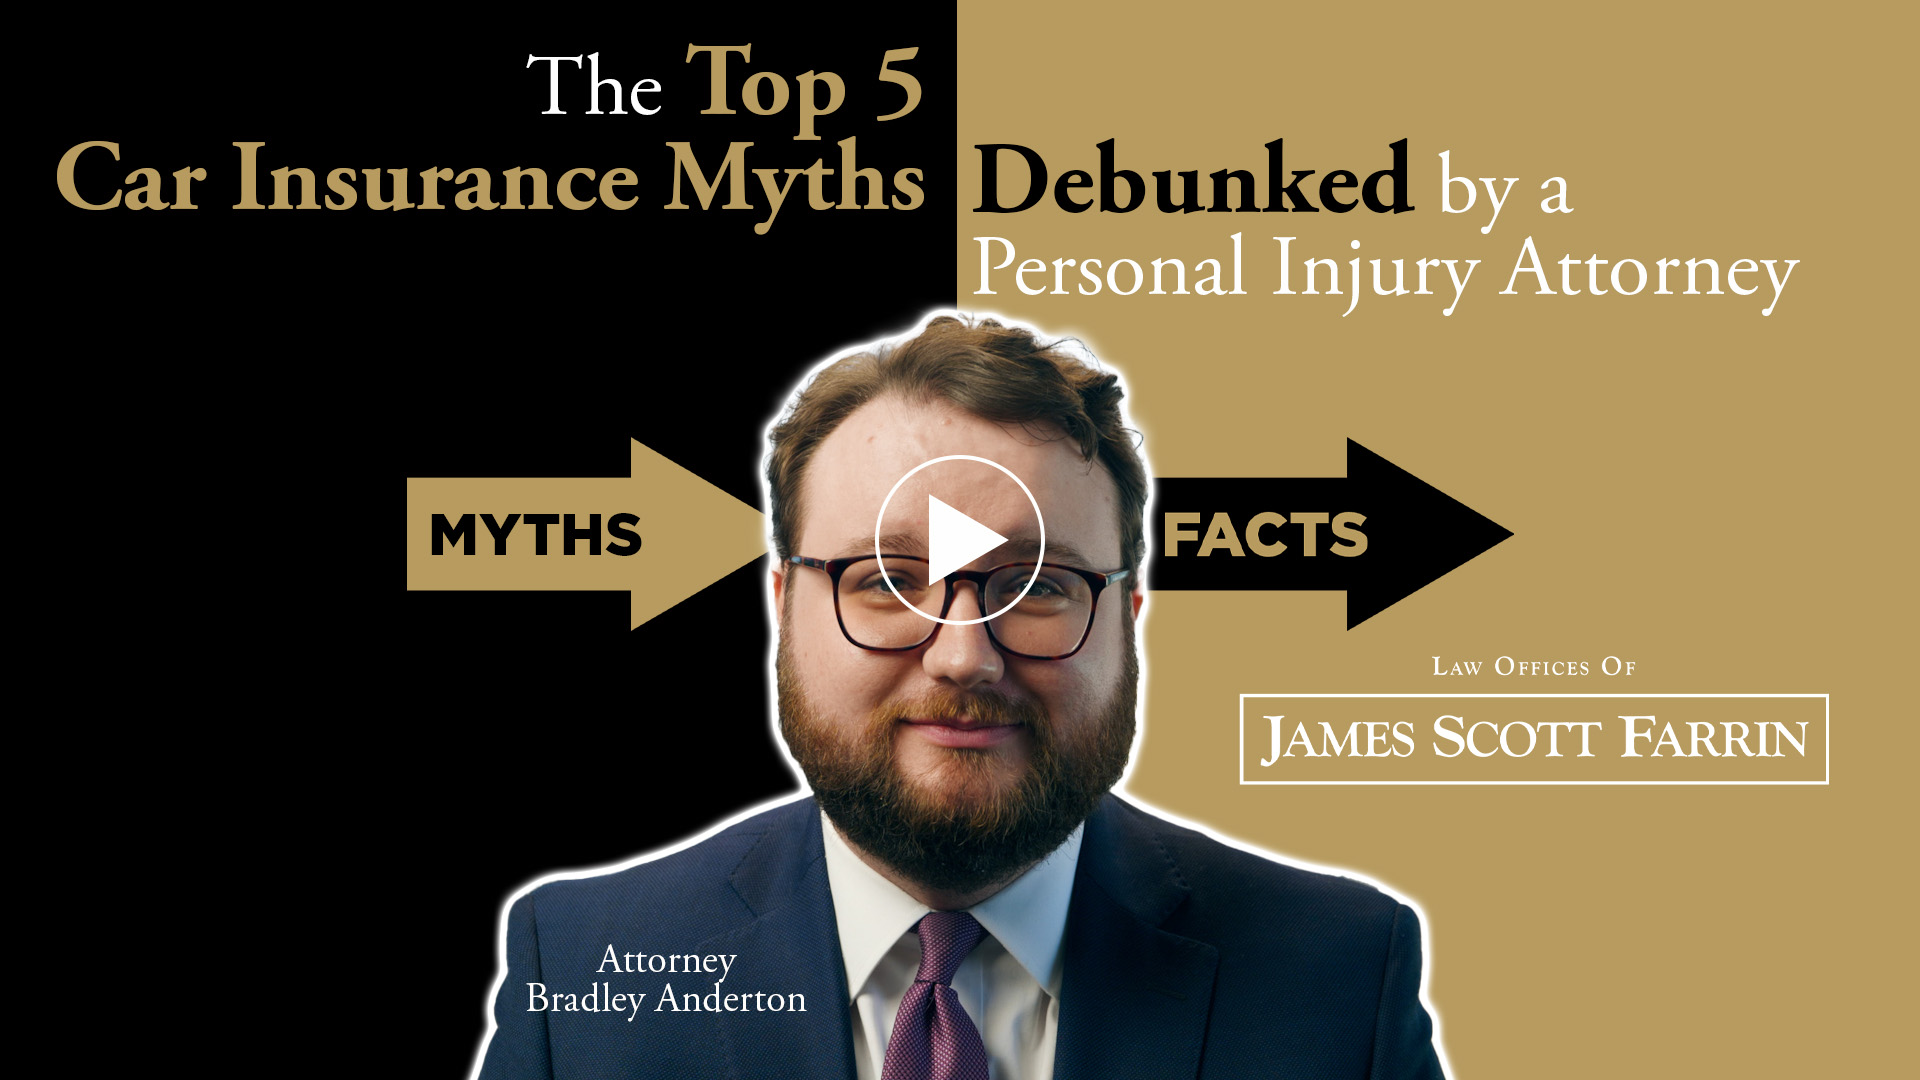 The Top 5 Car Insurance Myths Debunked by a Personal Injury Attorney